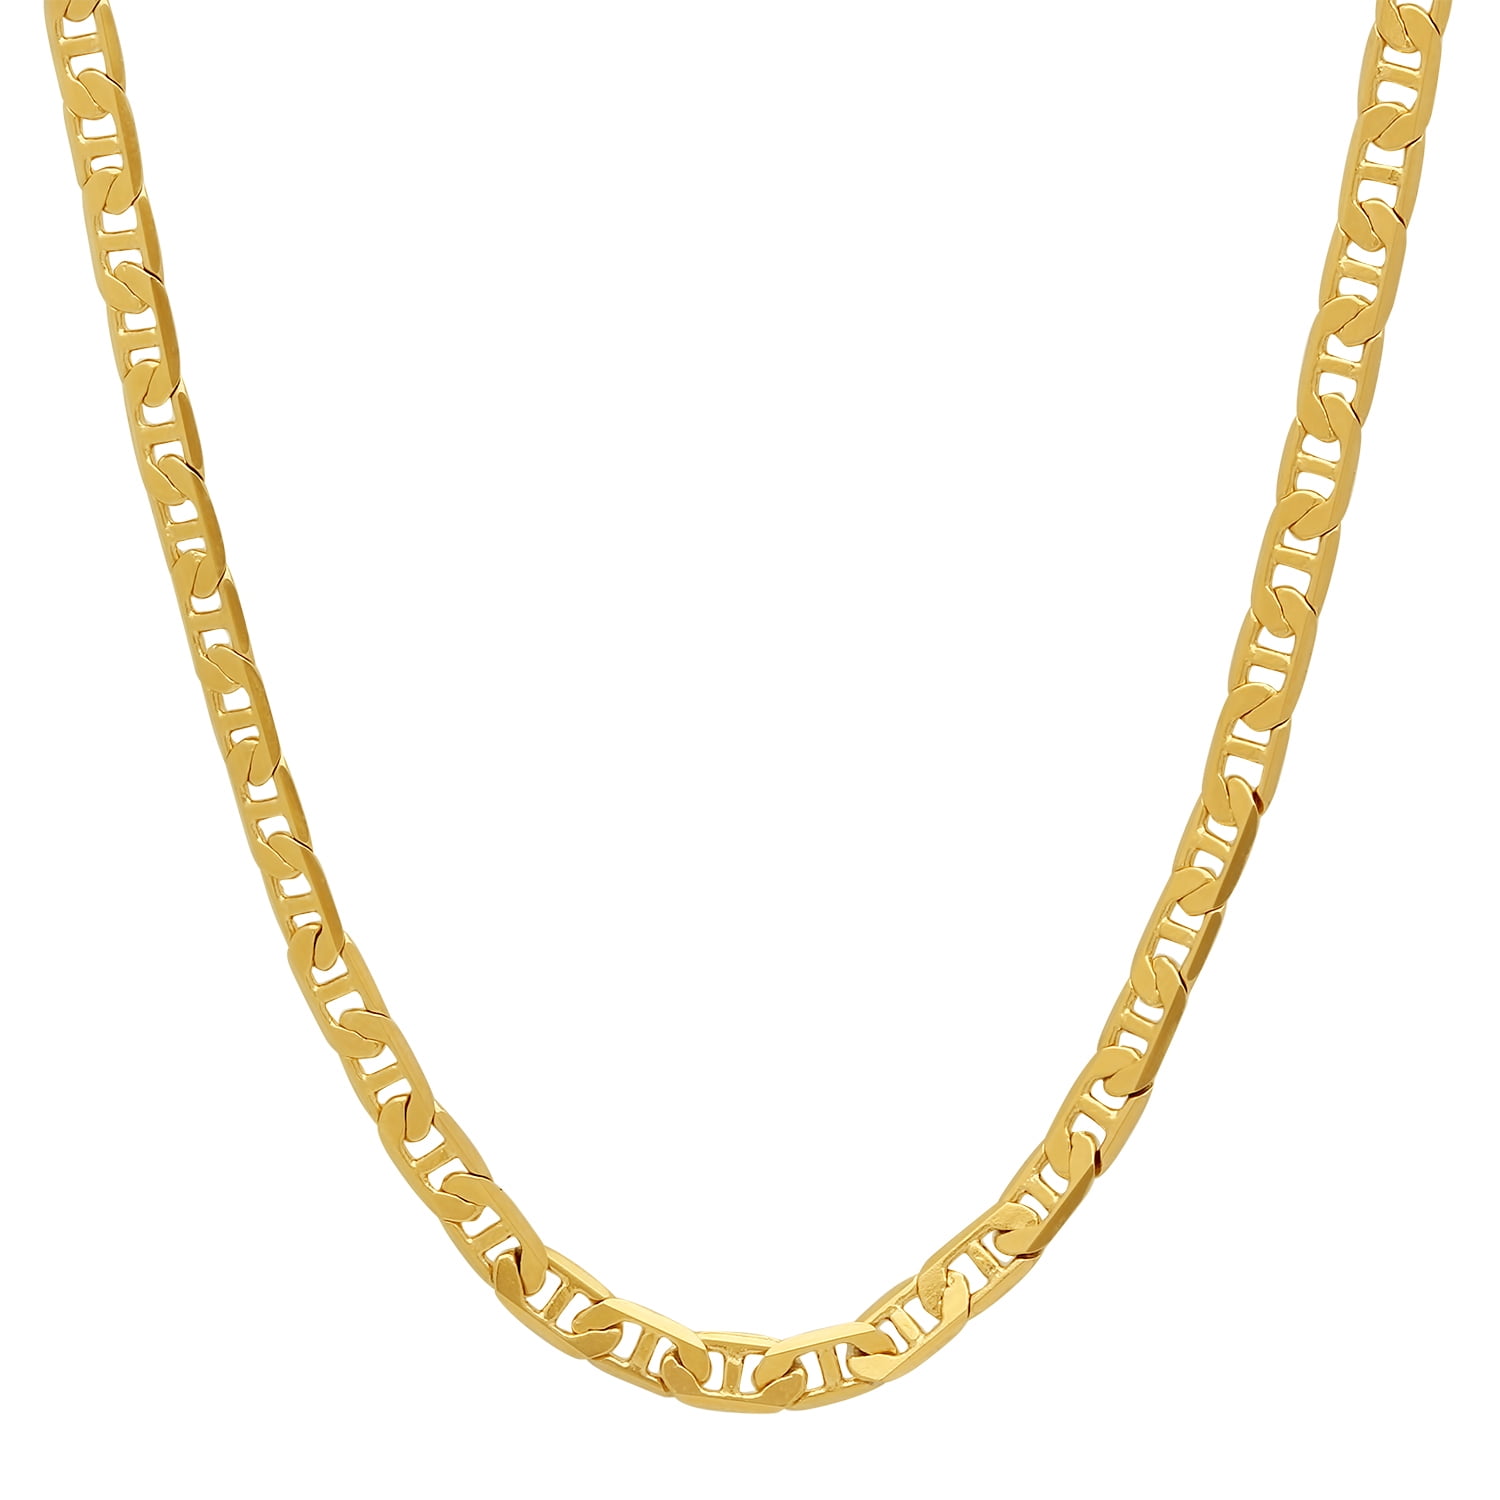 3.2mm 14k Yellow Gold Plated Flat Mariner Chain Necklace, 20